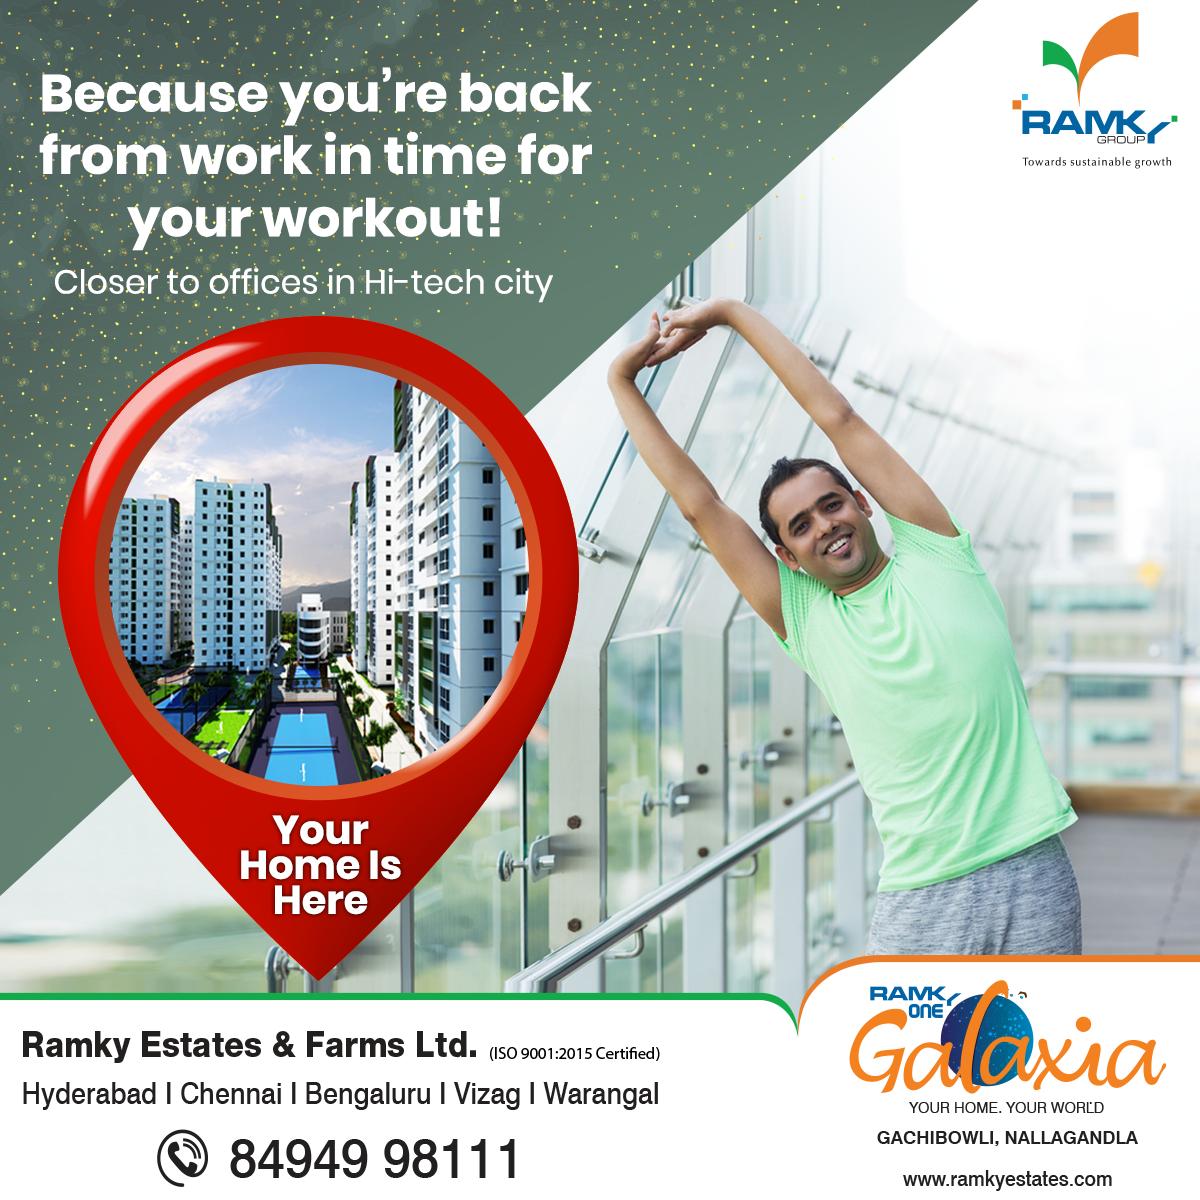 #RamkyOneGalaxia at #Gachibowli Nallagandla in #Hyderabad helps you curate a healthy lifestyle. #YourHomeIsHere

Book your #3BHK 1860 sq. ft. corner #apartment today! Prices start @ Rs. 1.11 crore. 
Know more at: bit.ly/2Cgc49l